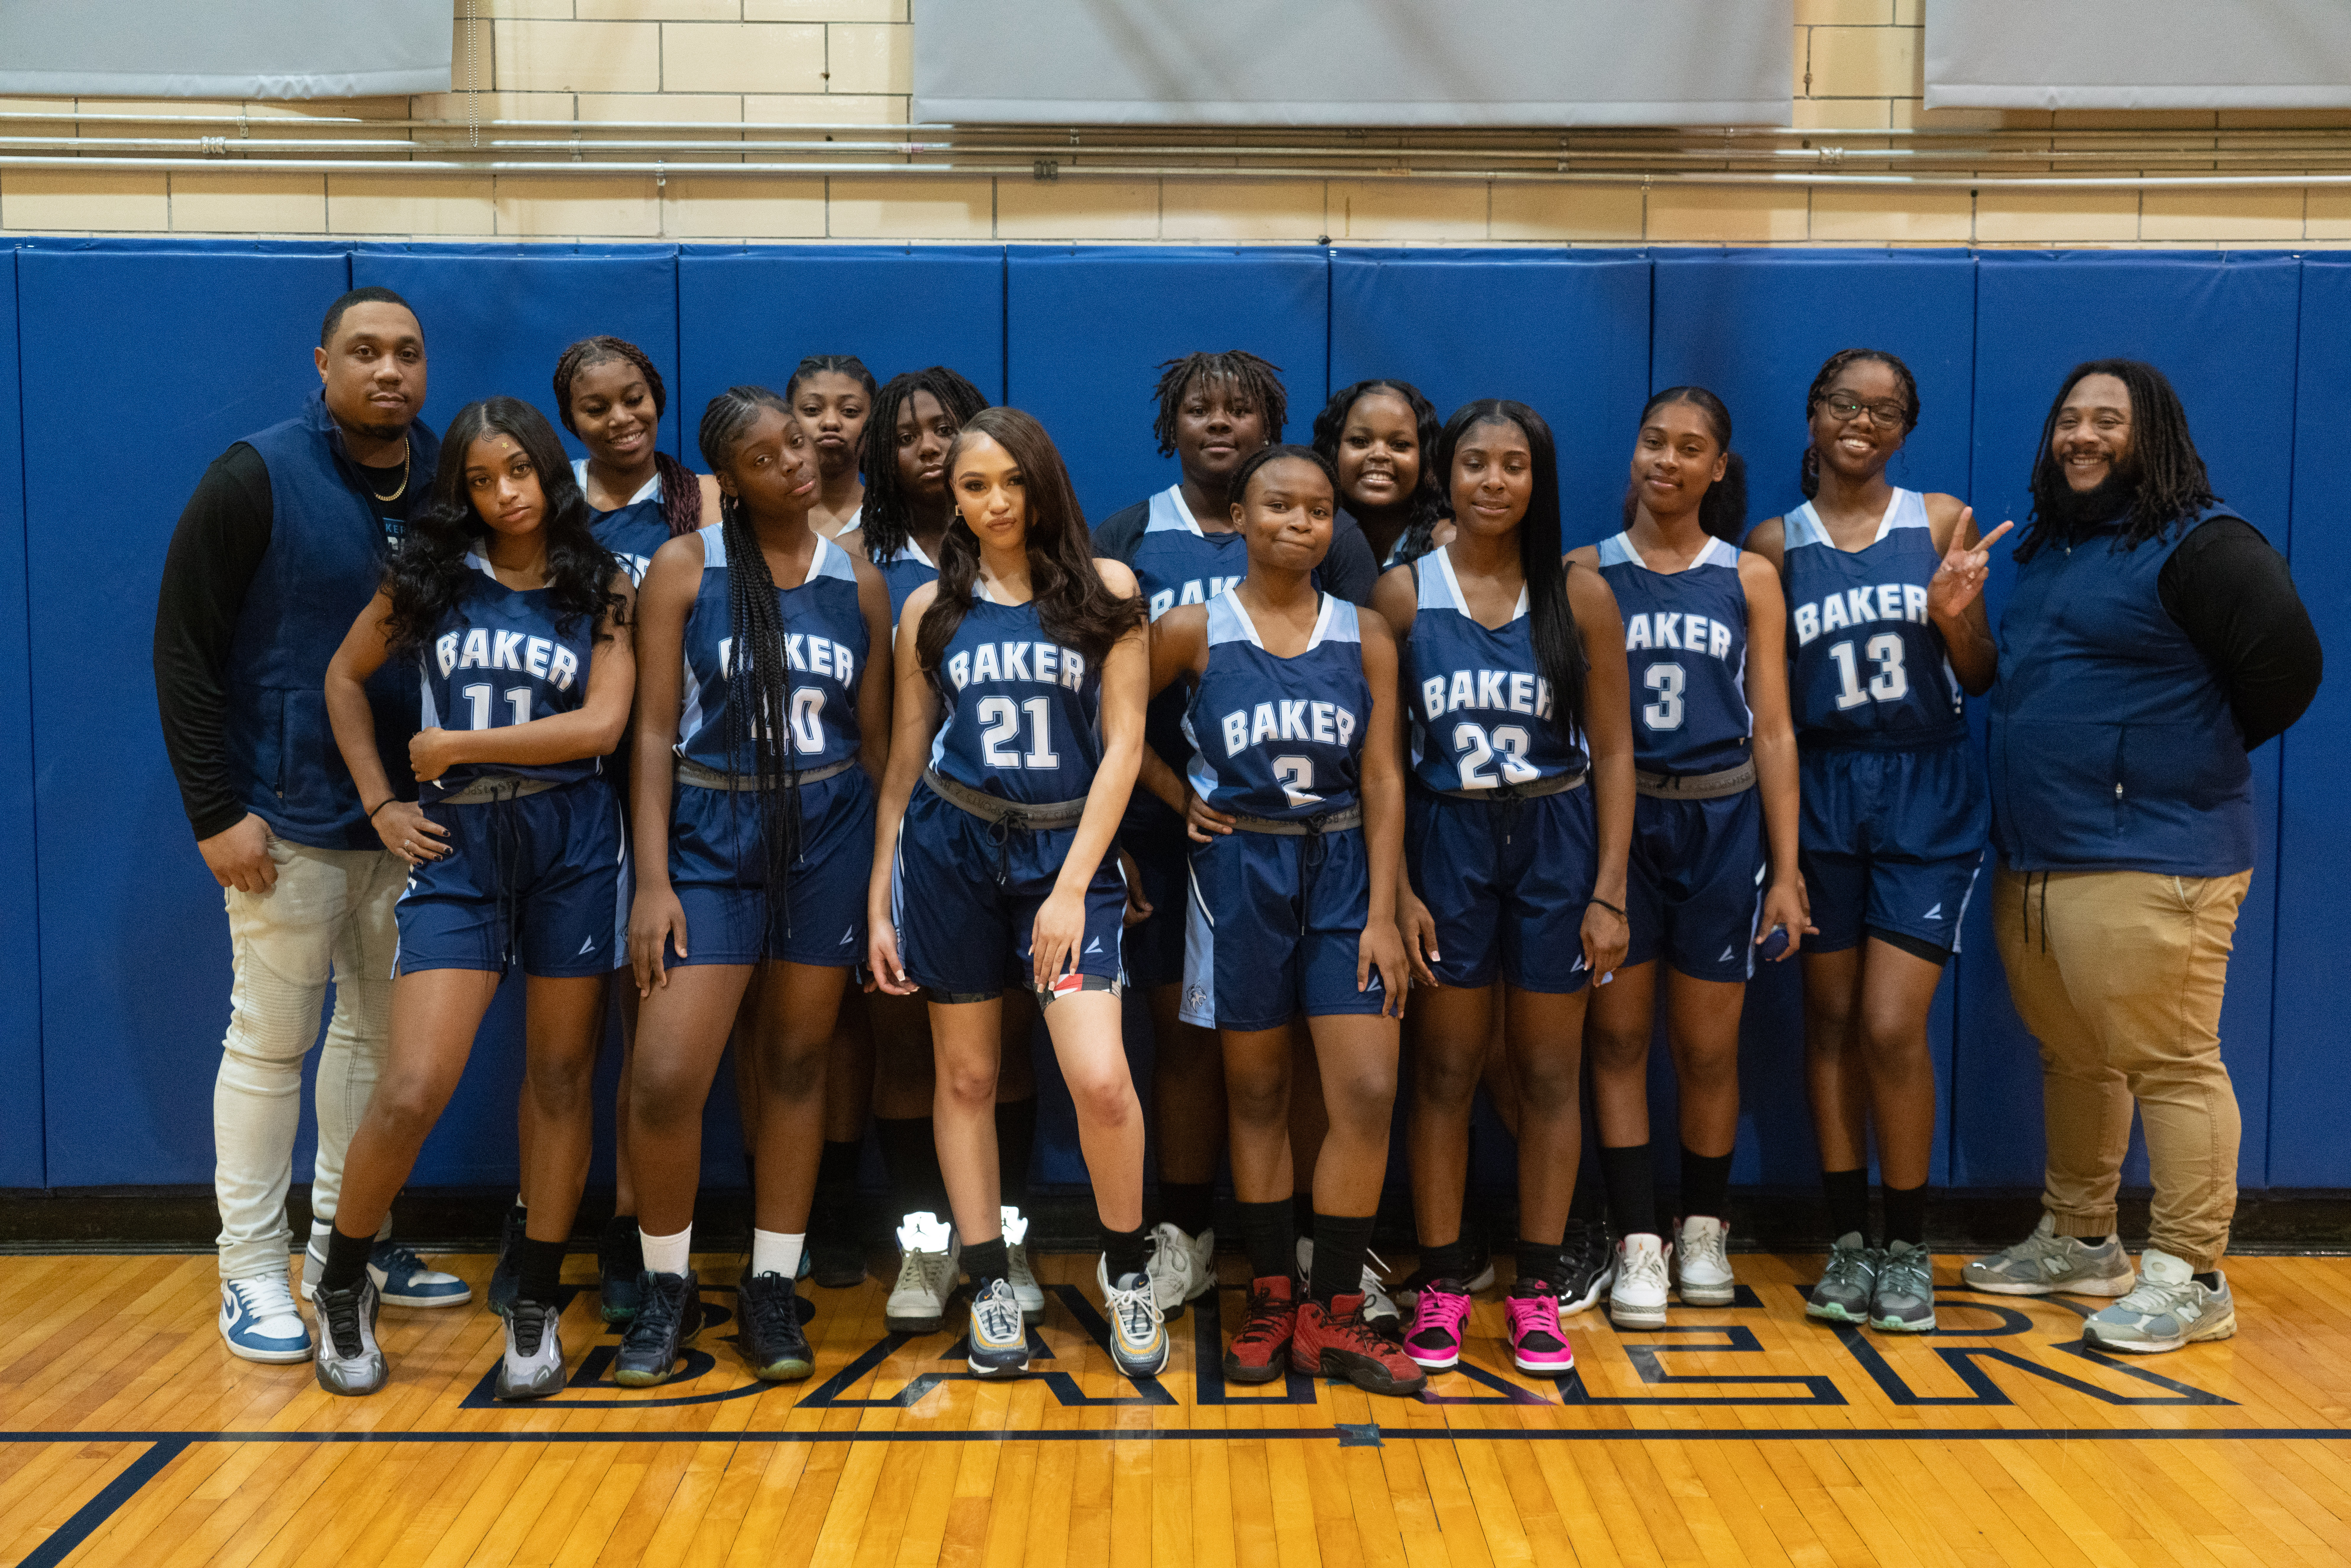 Image shows a group shot of Baker College Prep's girls varsity basketball team for the 2023-2024 school year. They are all in uniform and standing in a gym.